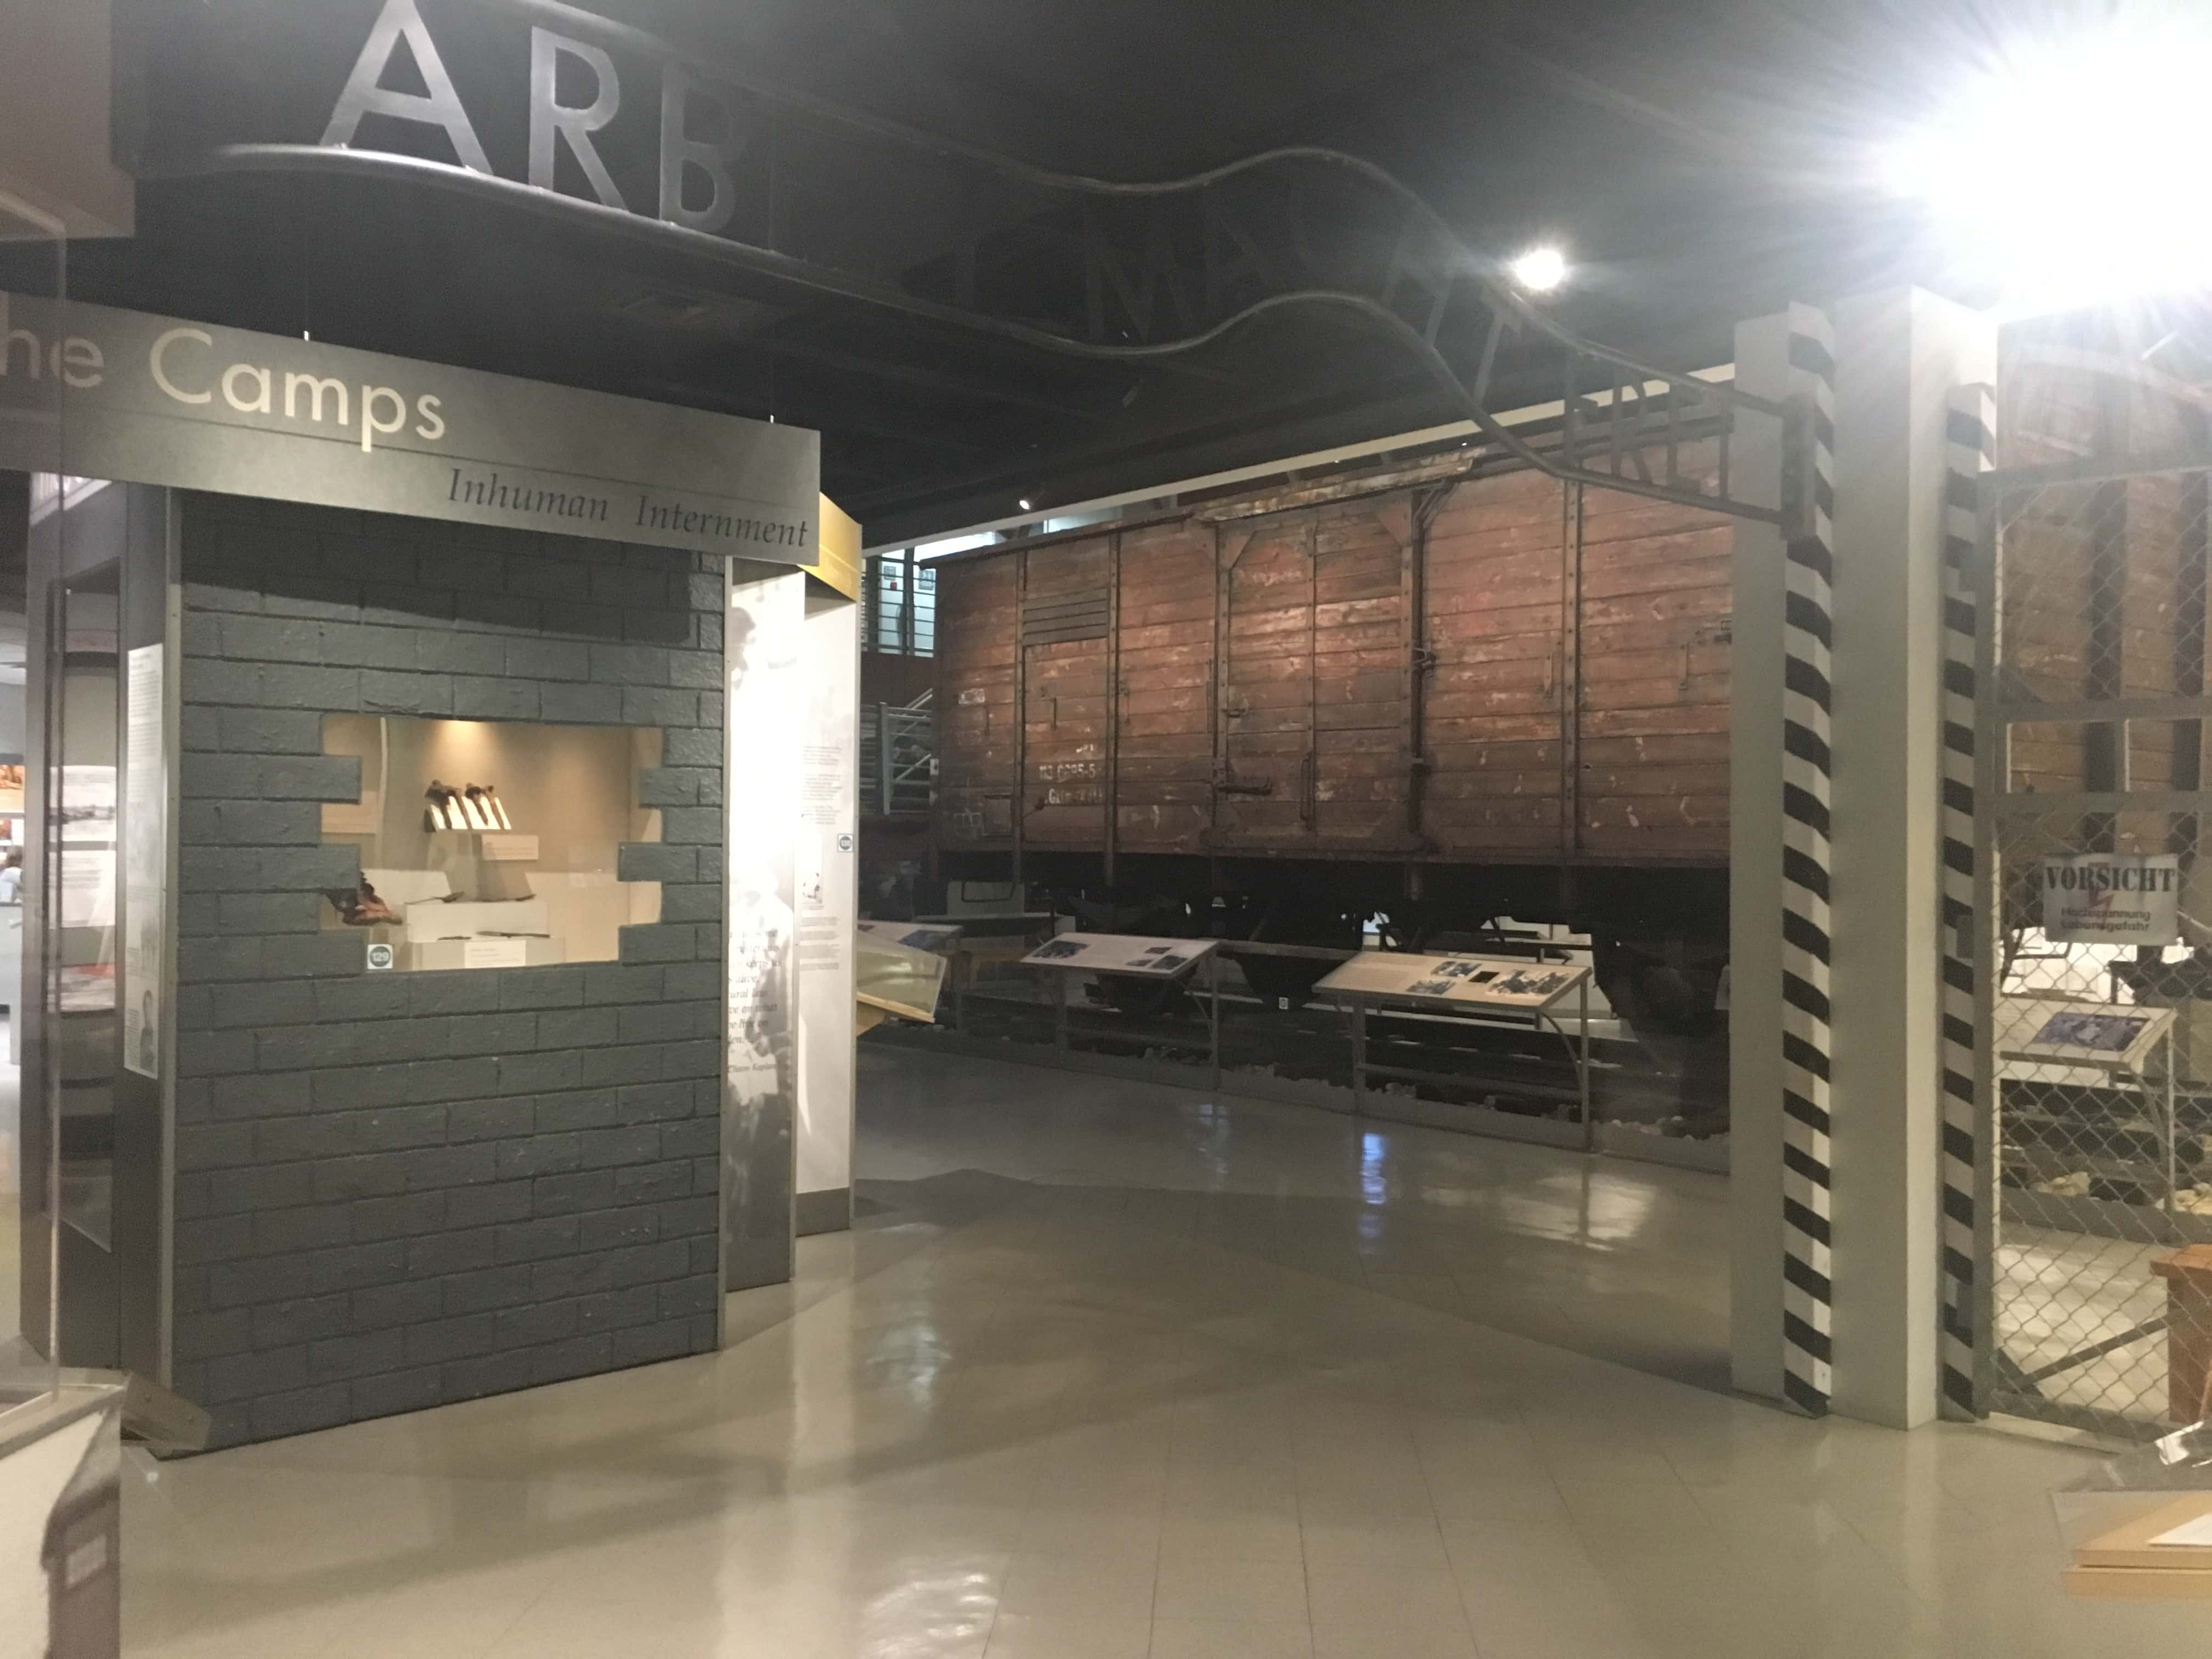 Concentration camp section at the Florida Holocaust Museum in St. Petersburg, Florida